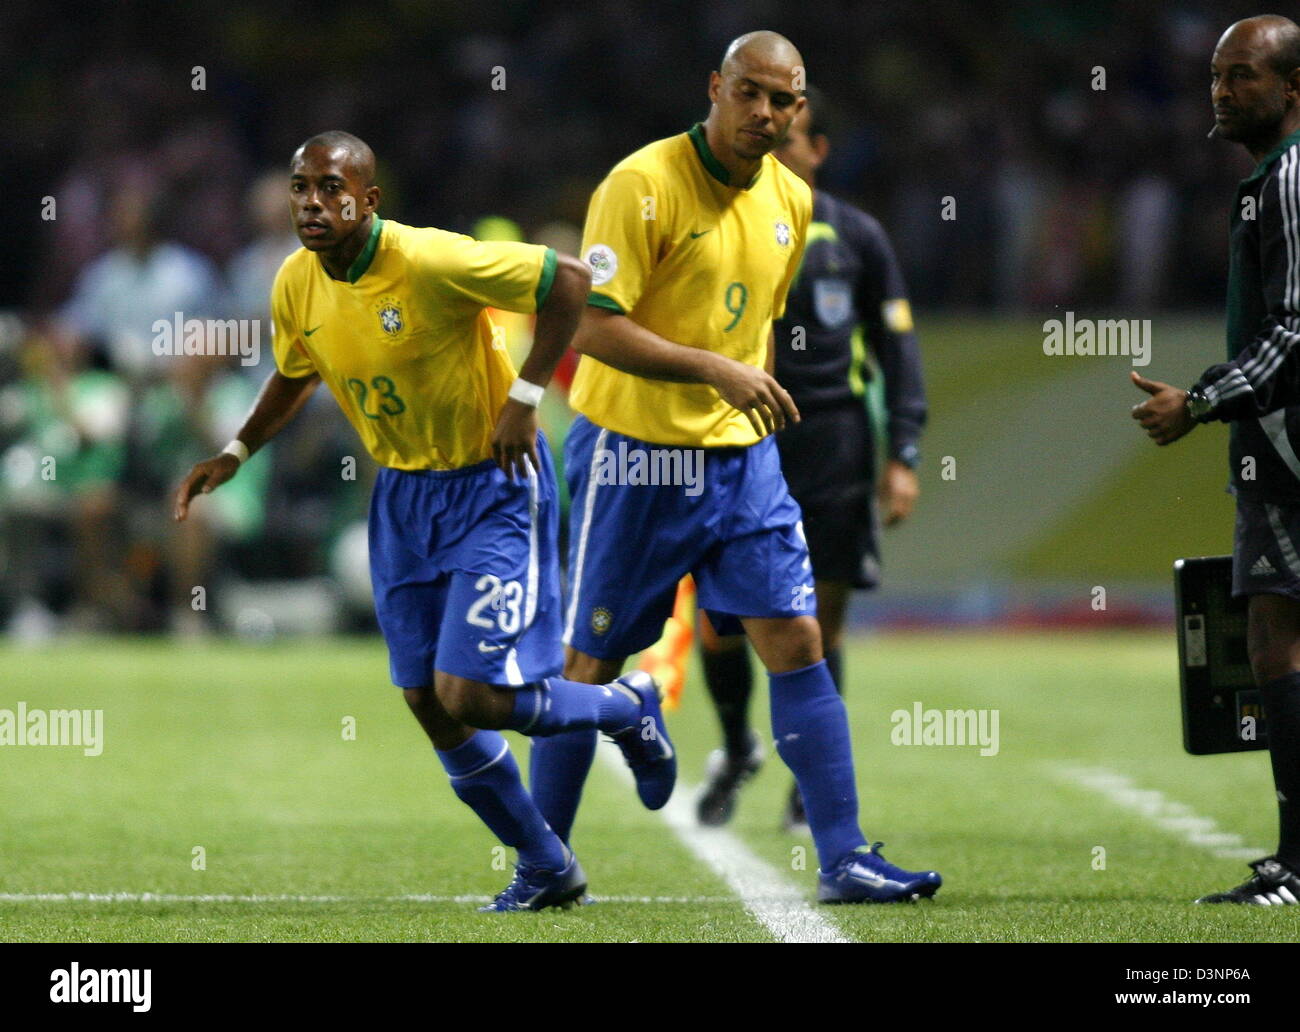 Brazilian soccer star Ronaldo (R) leaves the pitch for substitute Robinho during the FIFA World Cup 2006 group F preliminary match Brazil vs Croatia at the Olympic Stadium in Berlin, Germany, Tuesday, 13 June 2006. Photo: THOMAS EISENHUTH +++ Mobile Services OUT +++ Please refer to FIFA's Terms and Conditions. Stock Photo